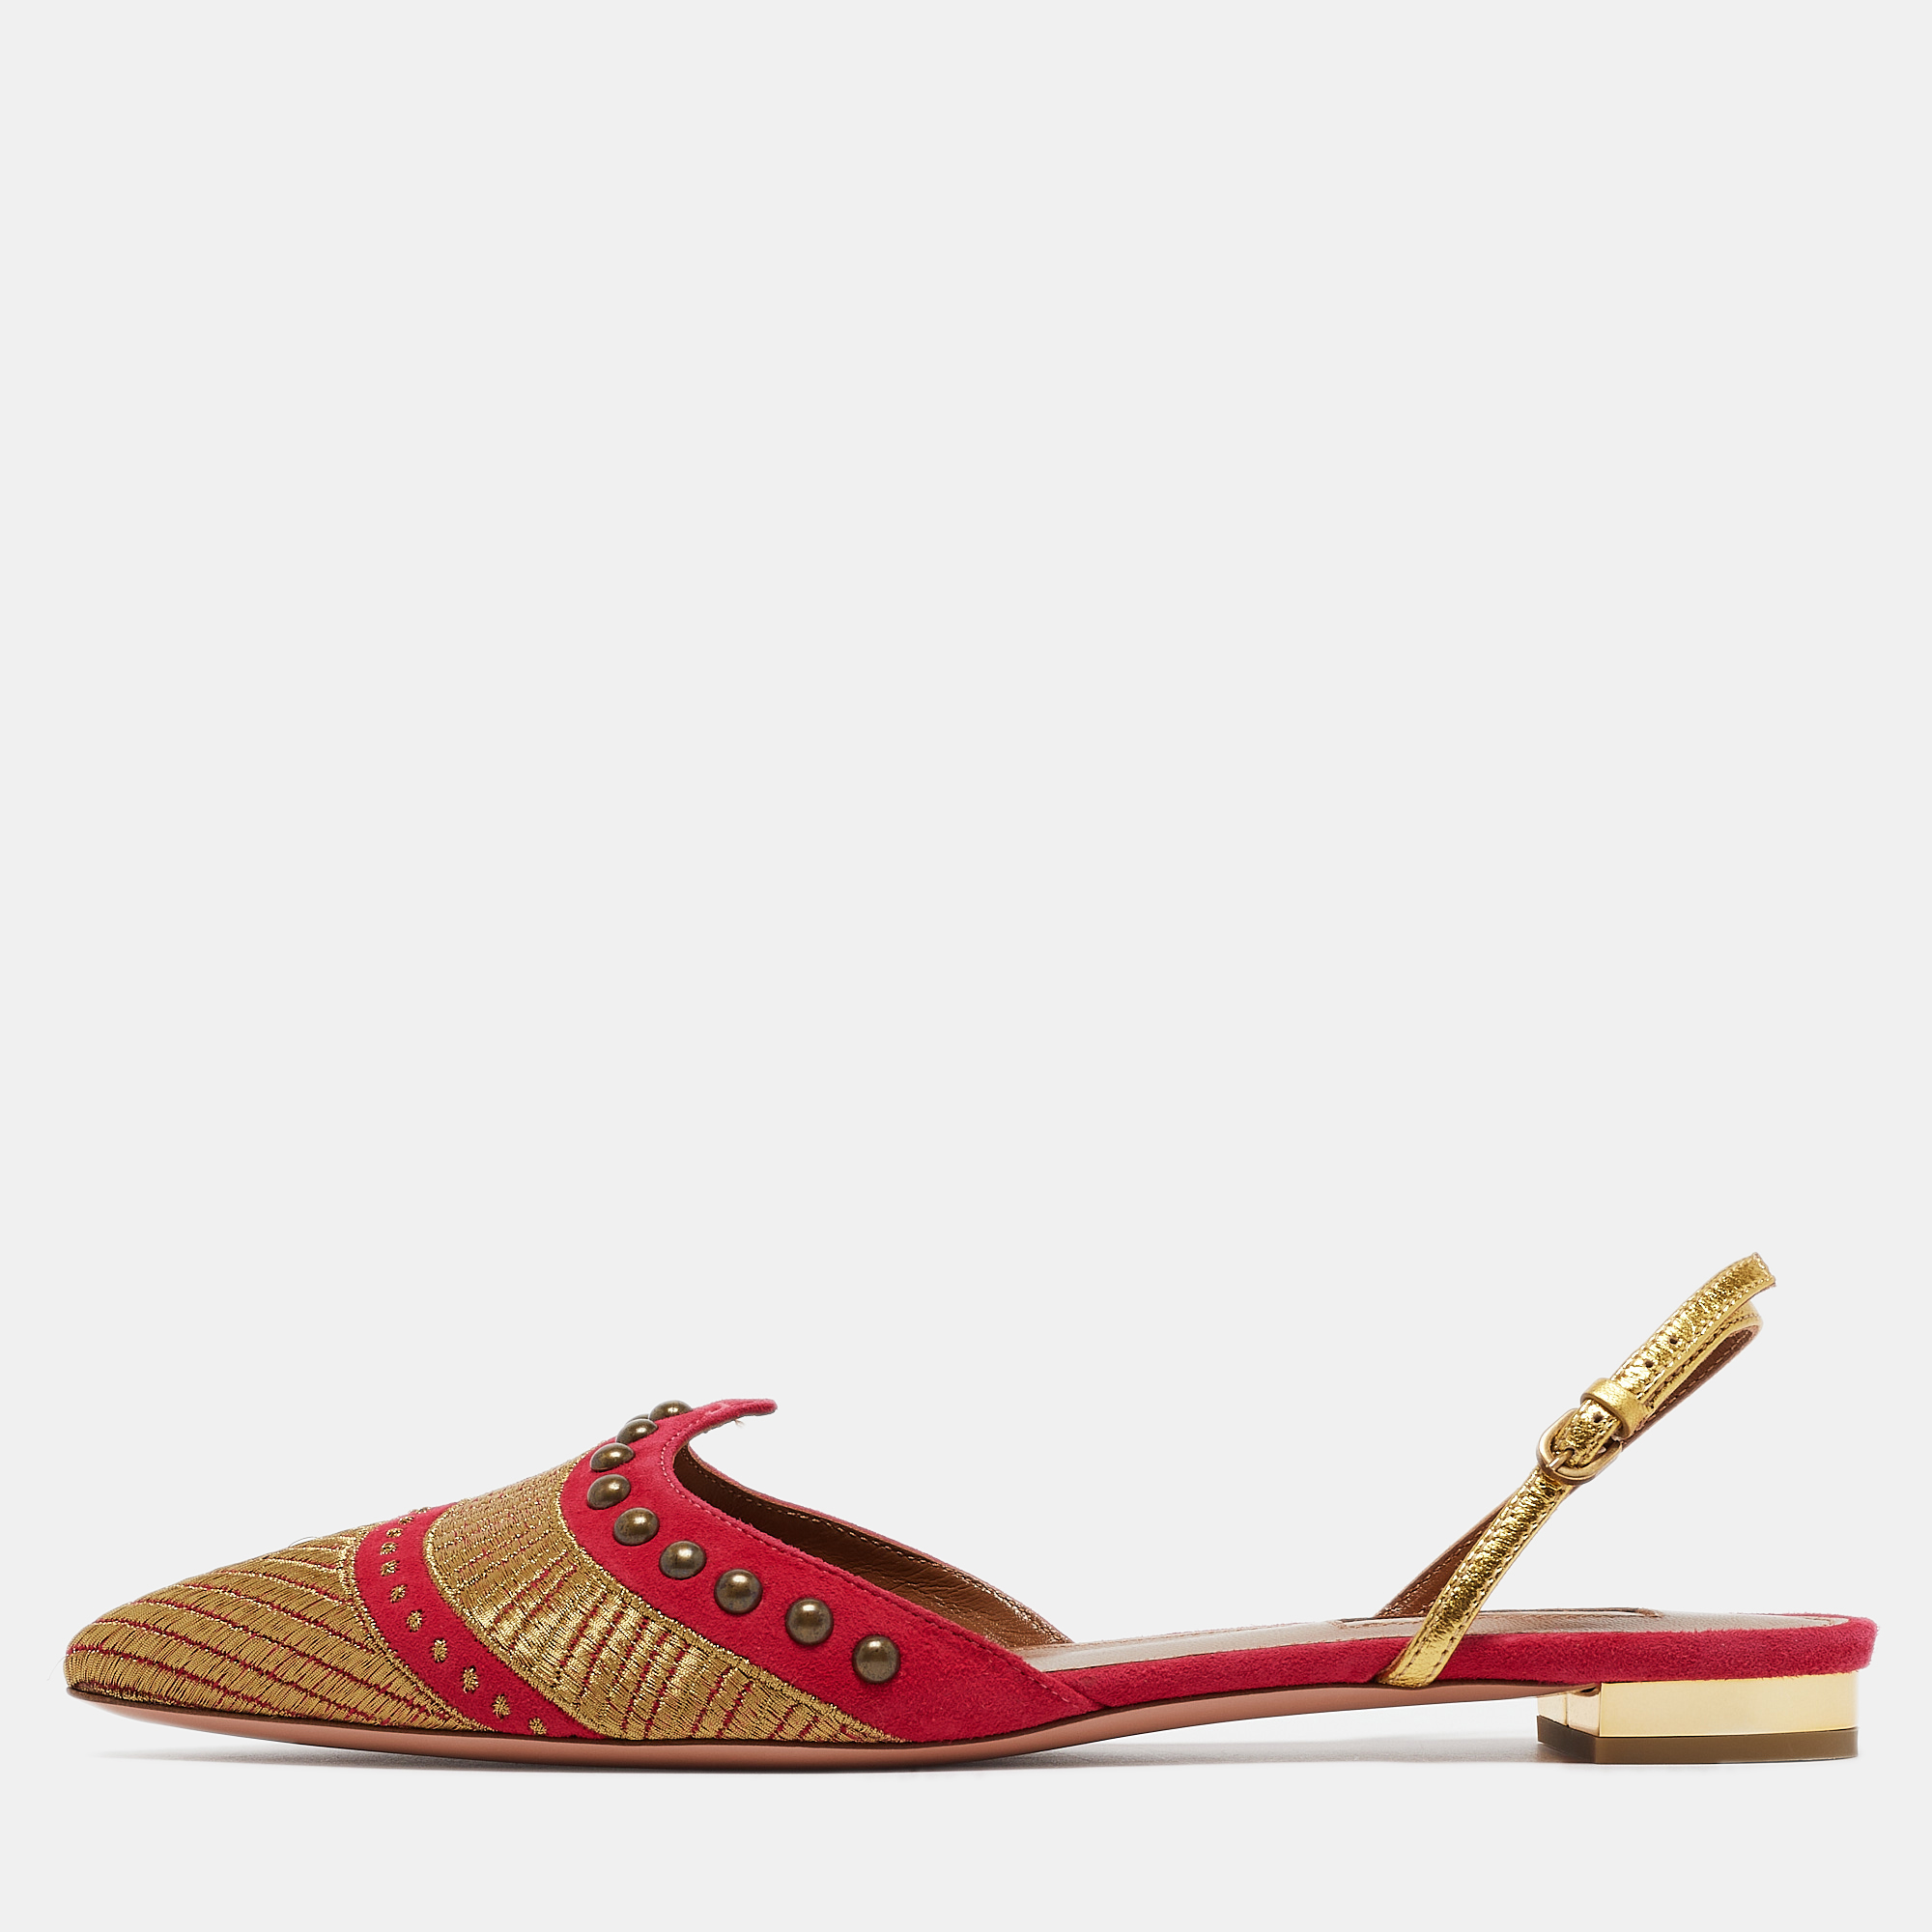 Aquazzura pink/gold suede and leather marrakech slingback flats size 38